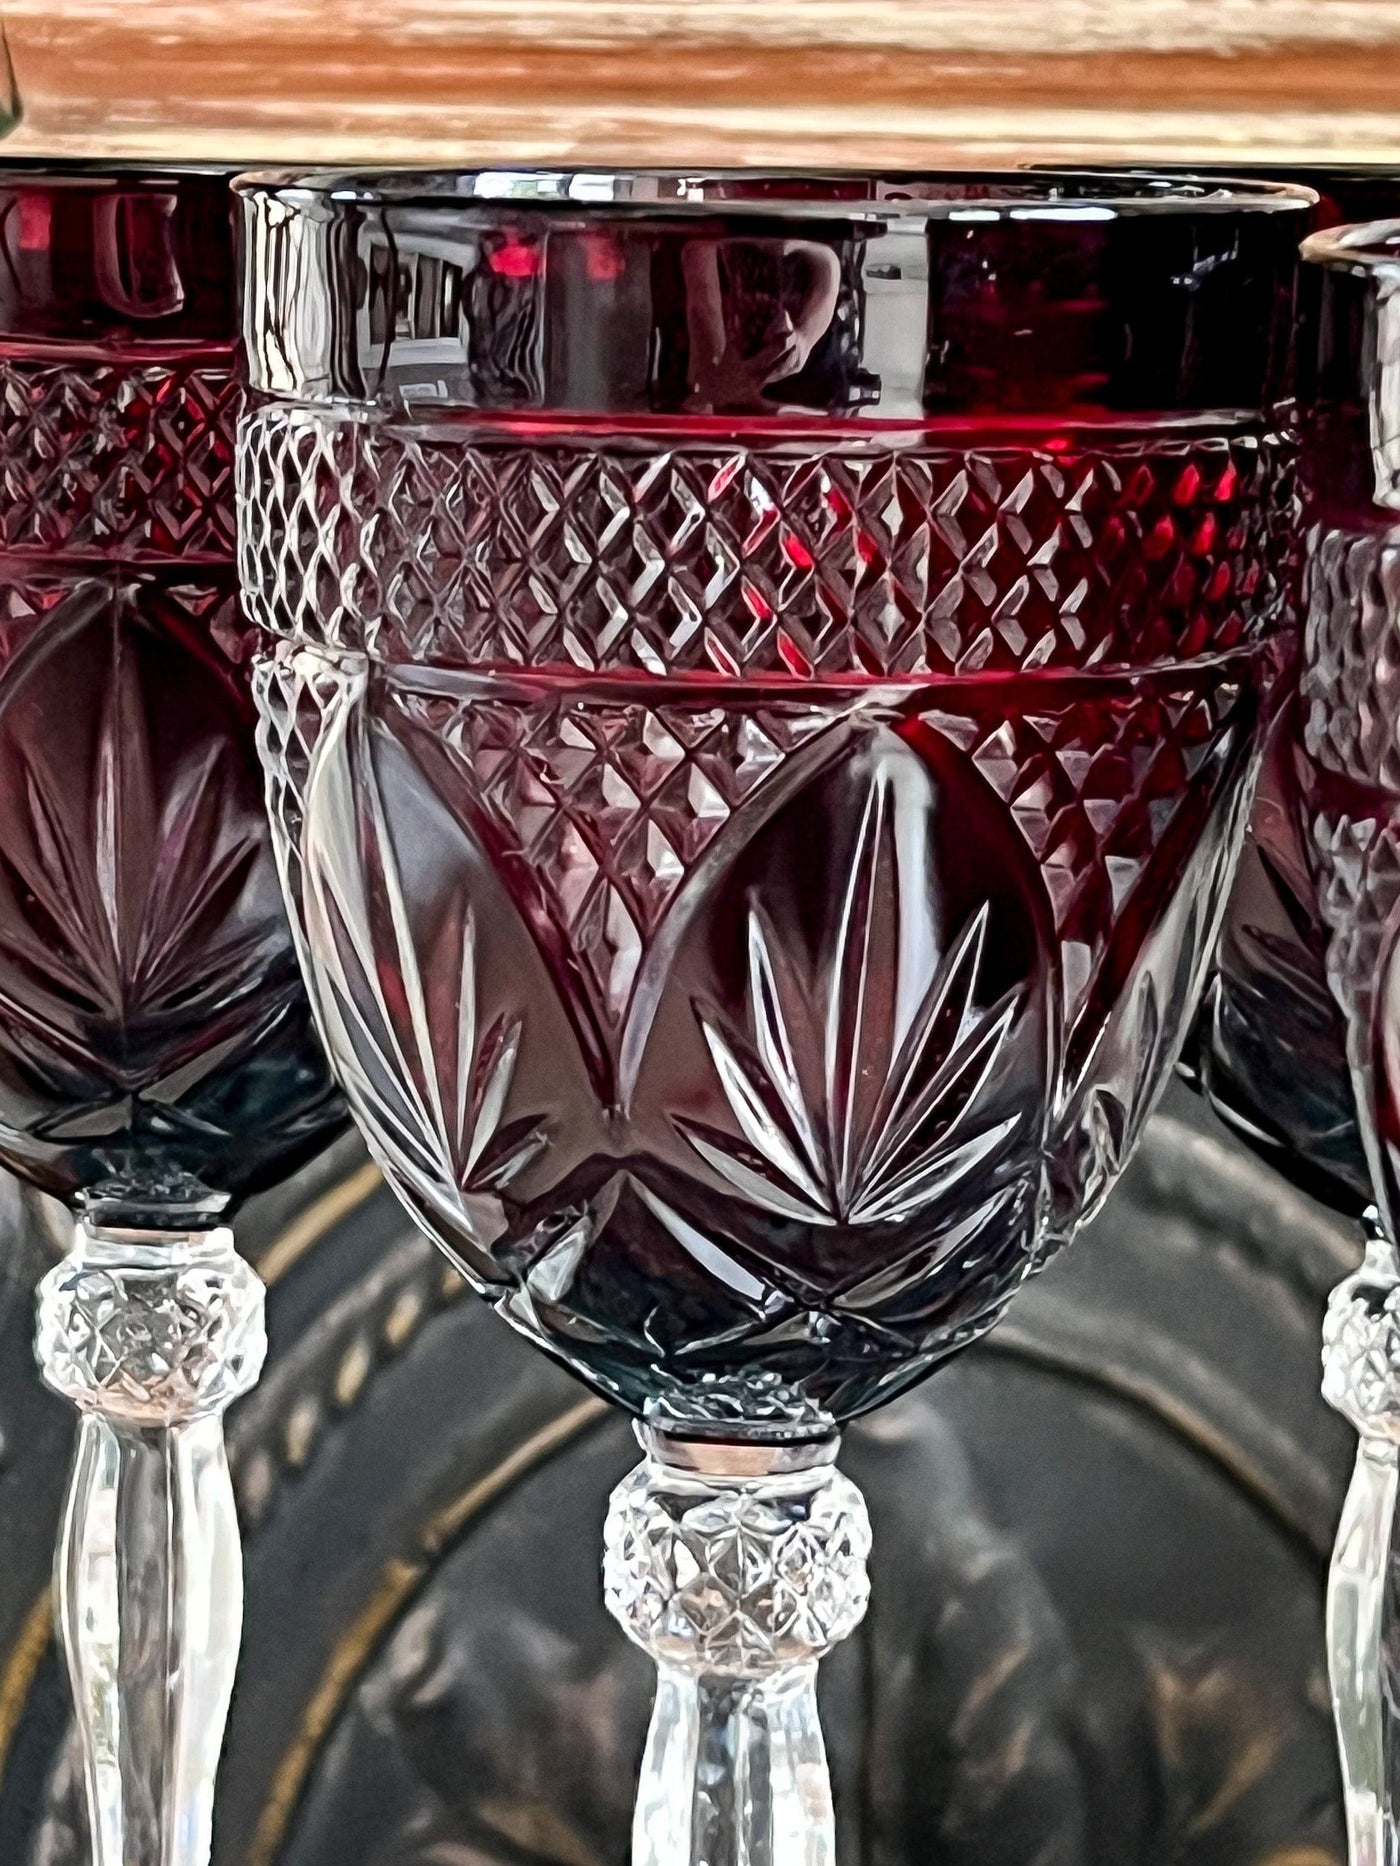 CUT CRYSTAL D'ARQUES DURAND RUBY RED WINE GLASSES SET OF 6 Revive In Style Vintage Furniture Painted Refinished Redesign Beautiful One of a Kind Artistic Antique Unique Home Decor Interior Design French Country Shabby Chic Cottage Farmhouse Grandmillenial Coastal Chalk Paint Metallic Glam Eclectic Quality Dovetailed Rustic Furniture Painter Pinterest Bedroom Living Room Entryway Kitchen Home Trends House Styles Decorating ideas